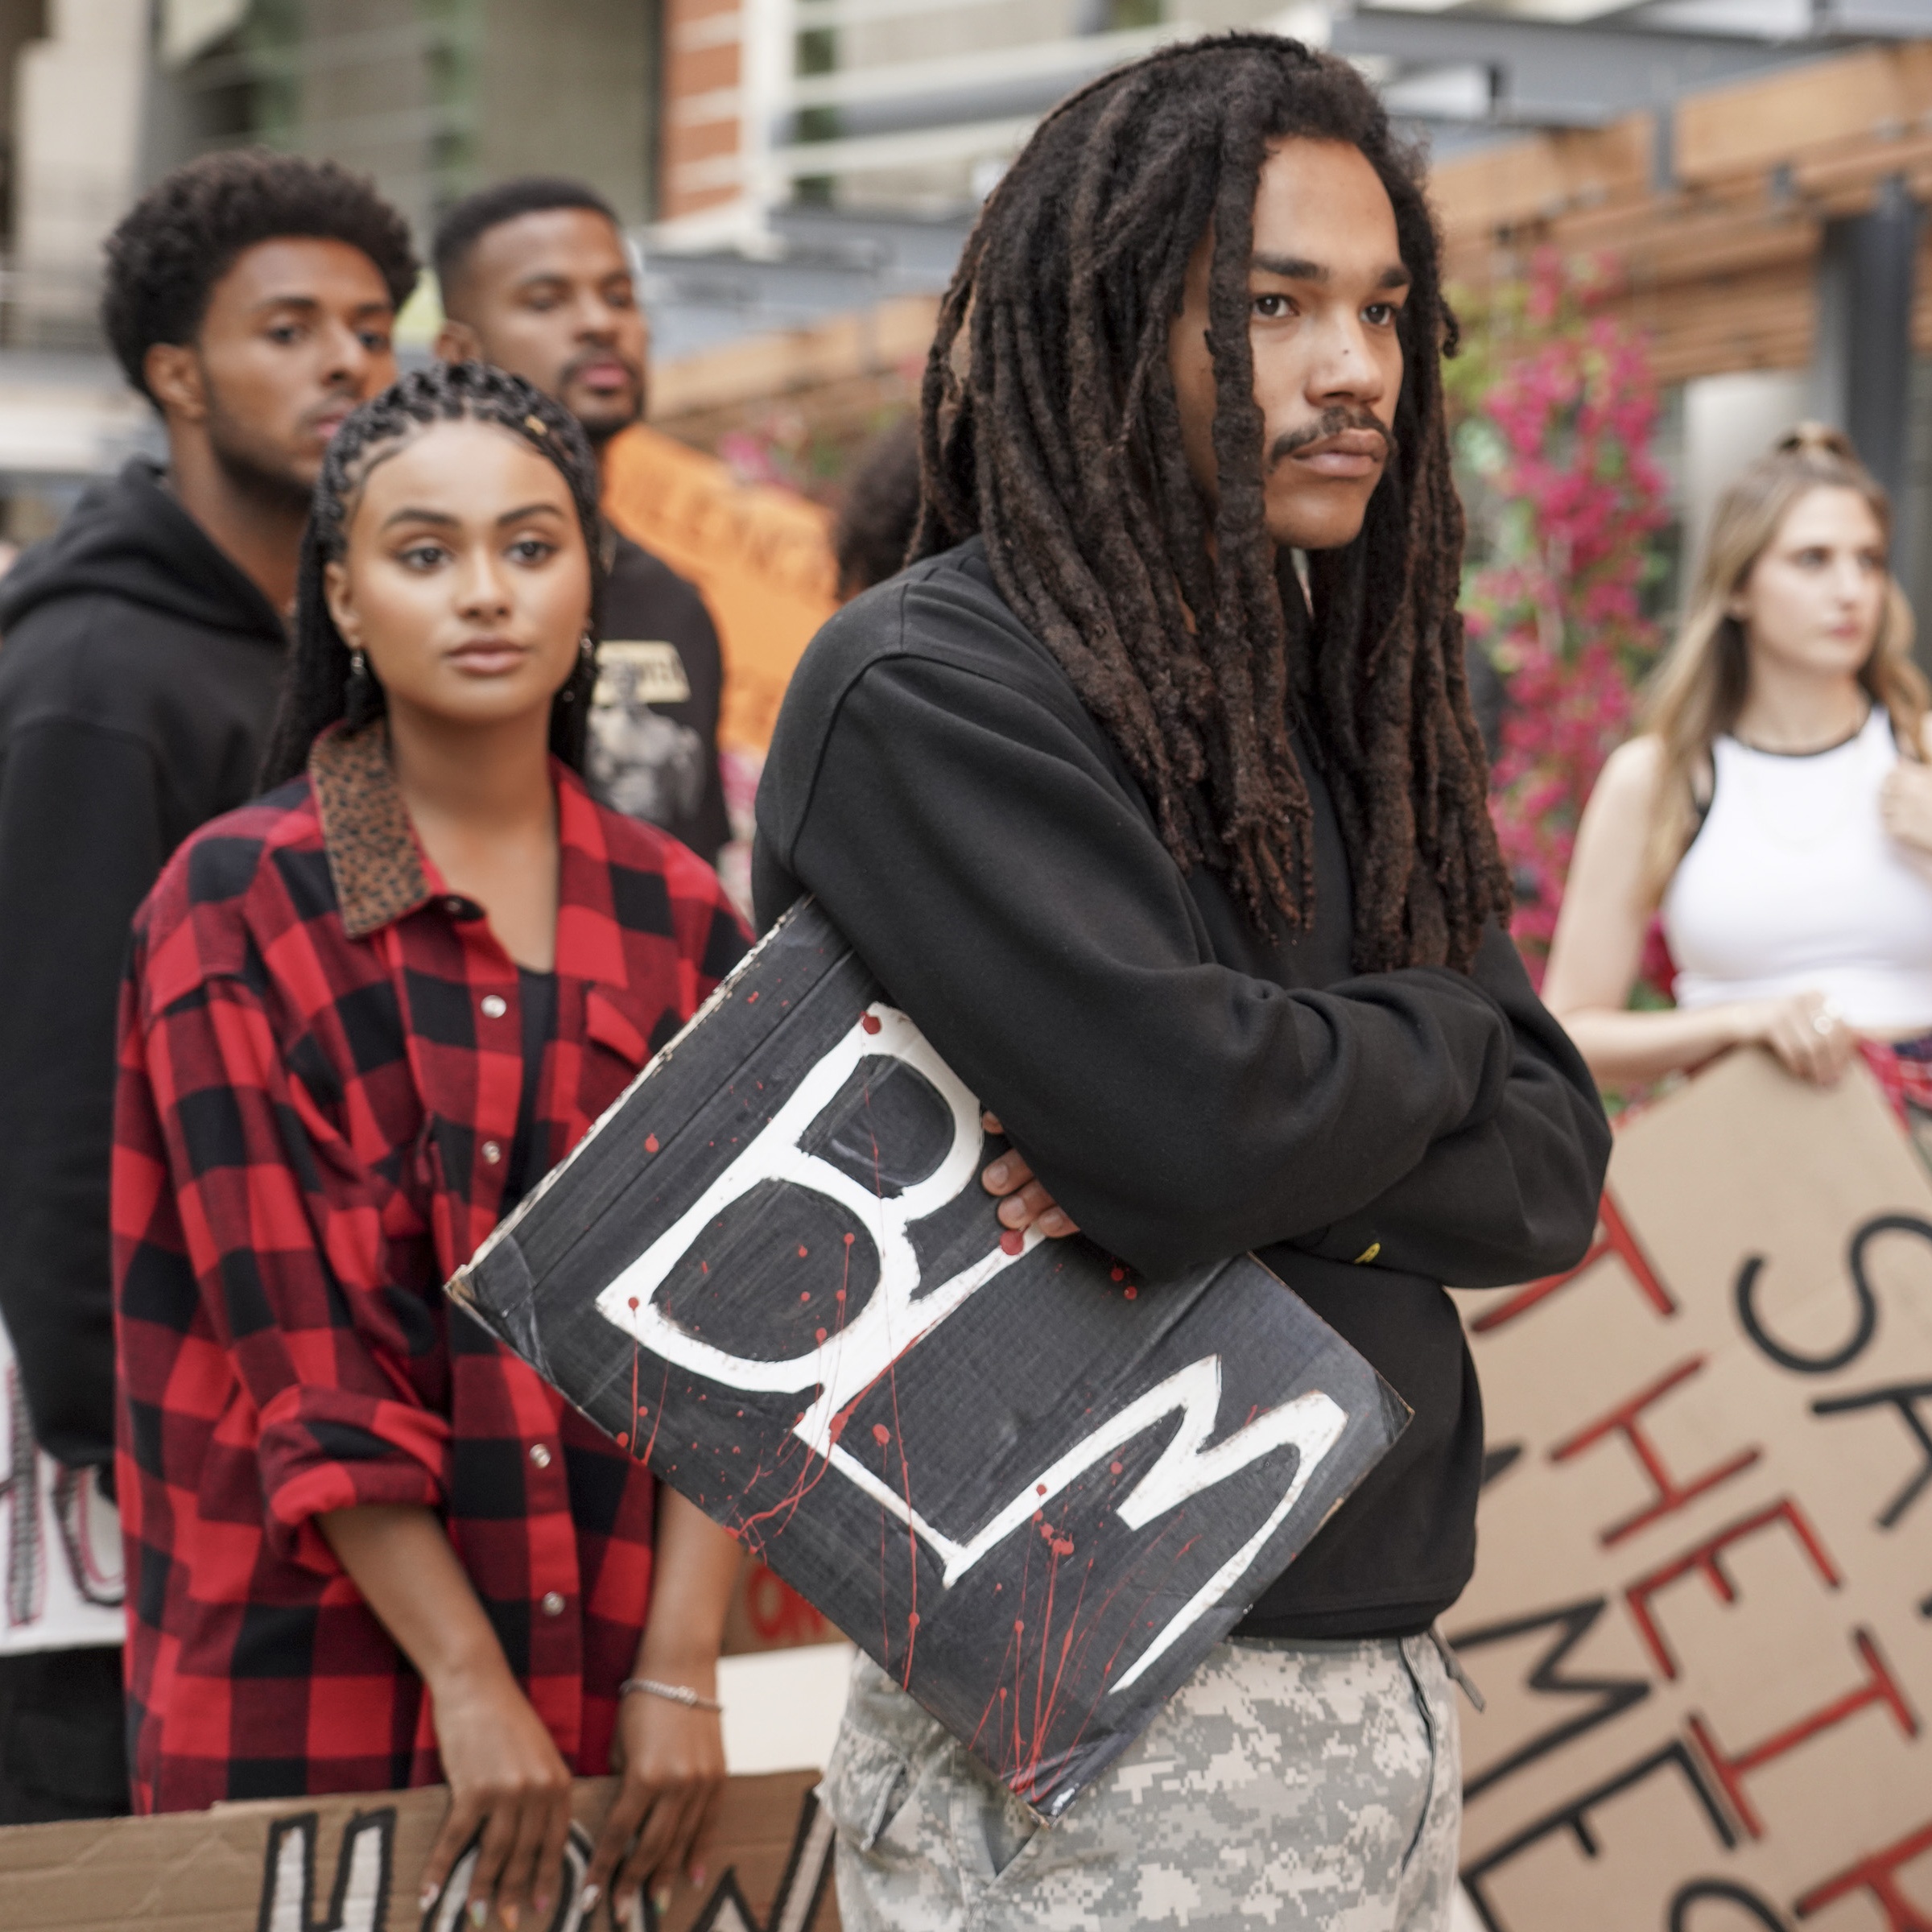 Meet The Executive Producer Addressing Police Brutality On ‘Grown-ish’